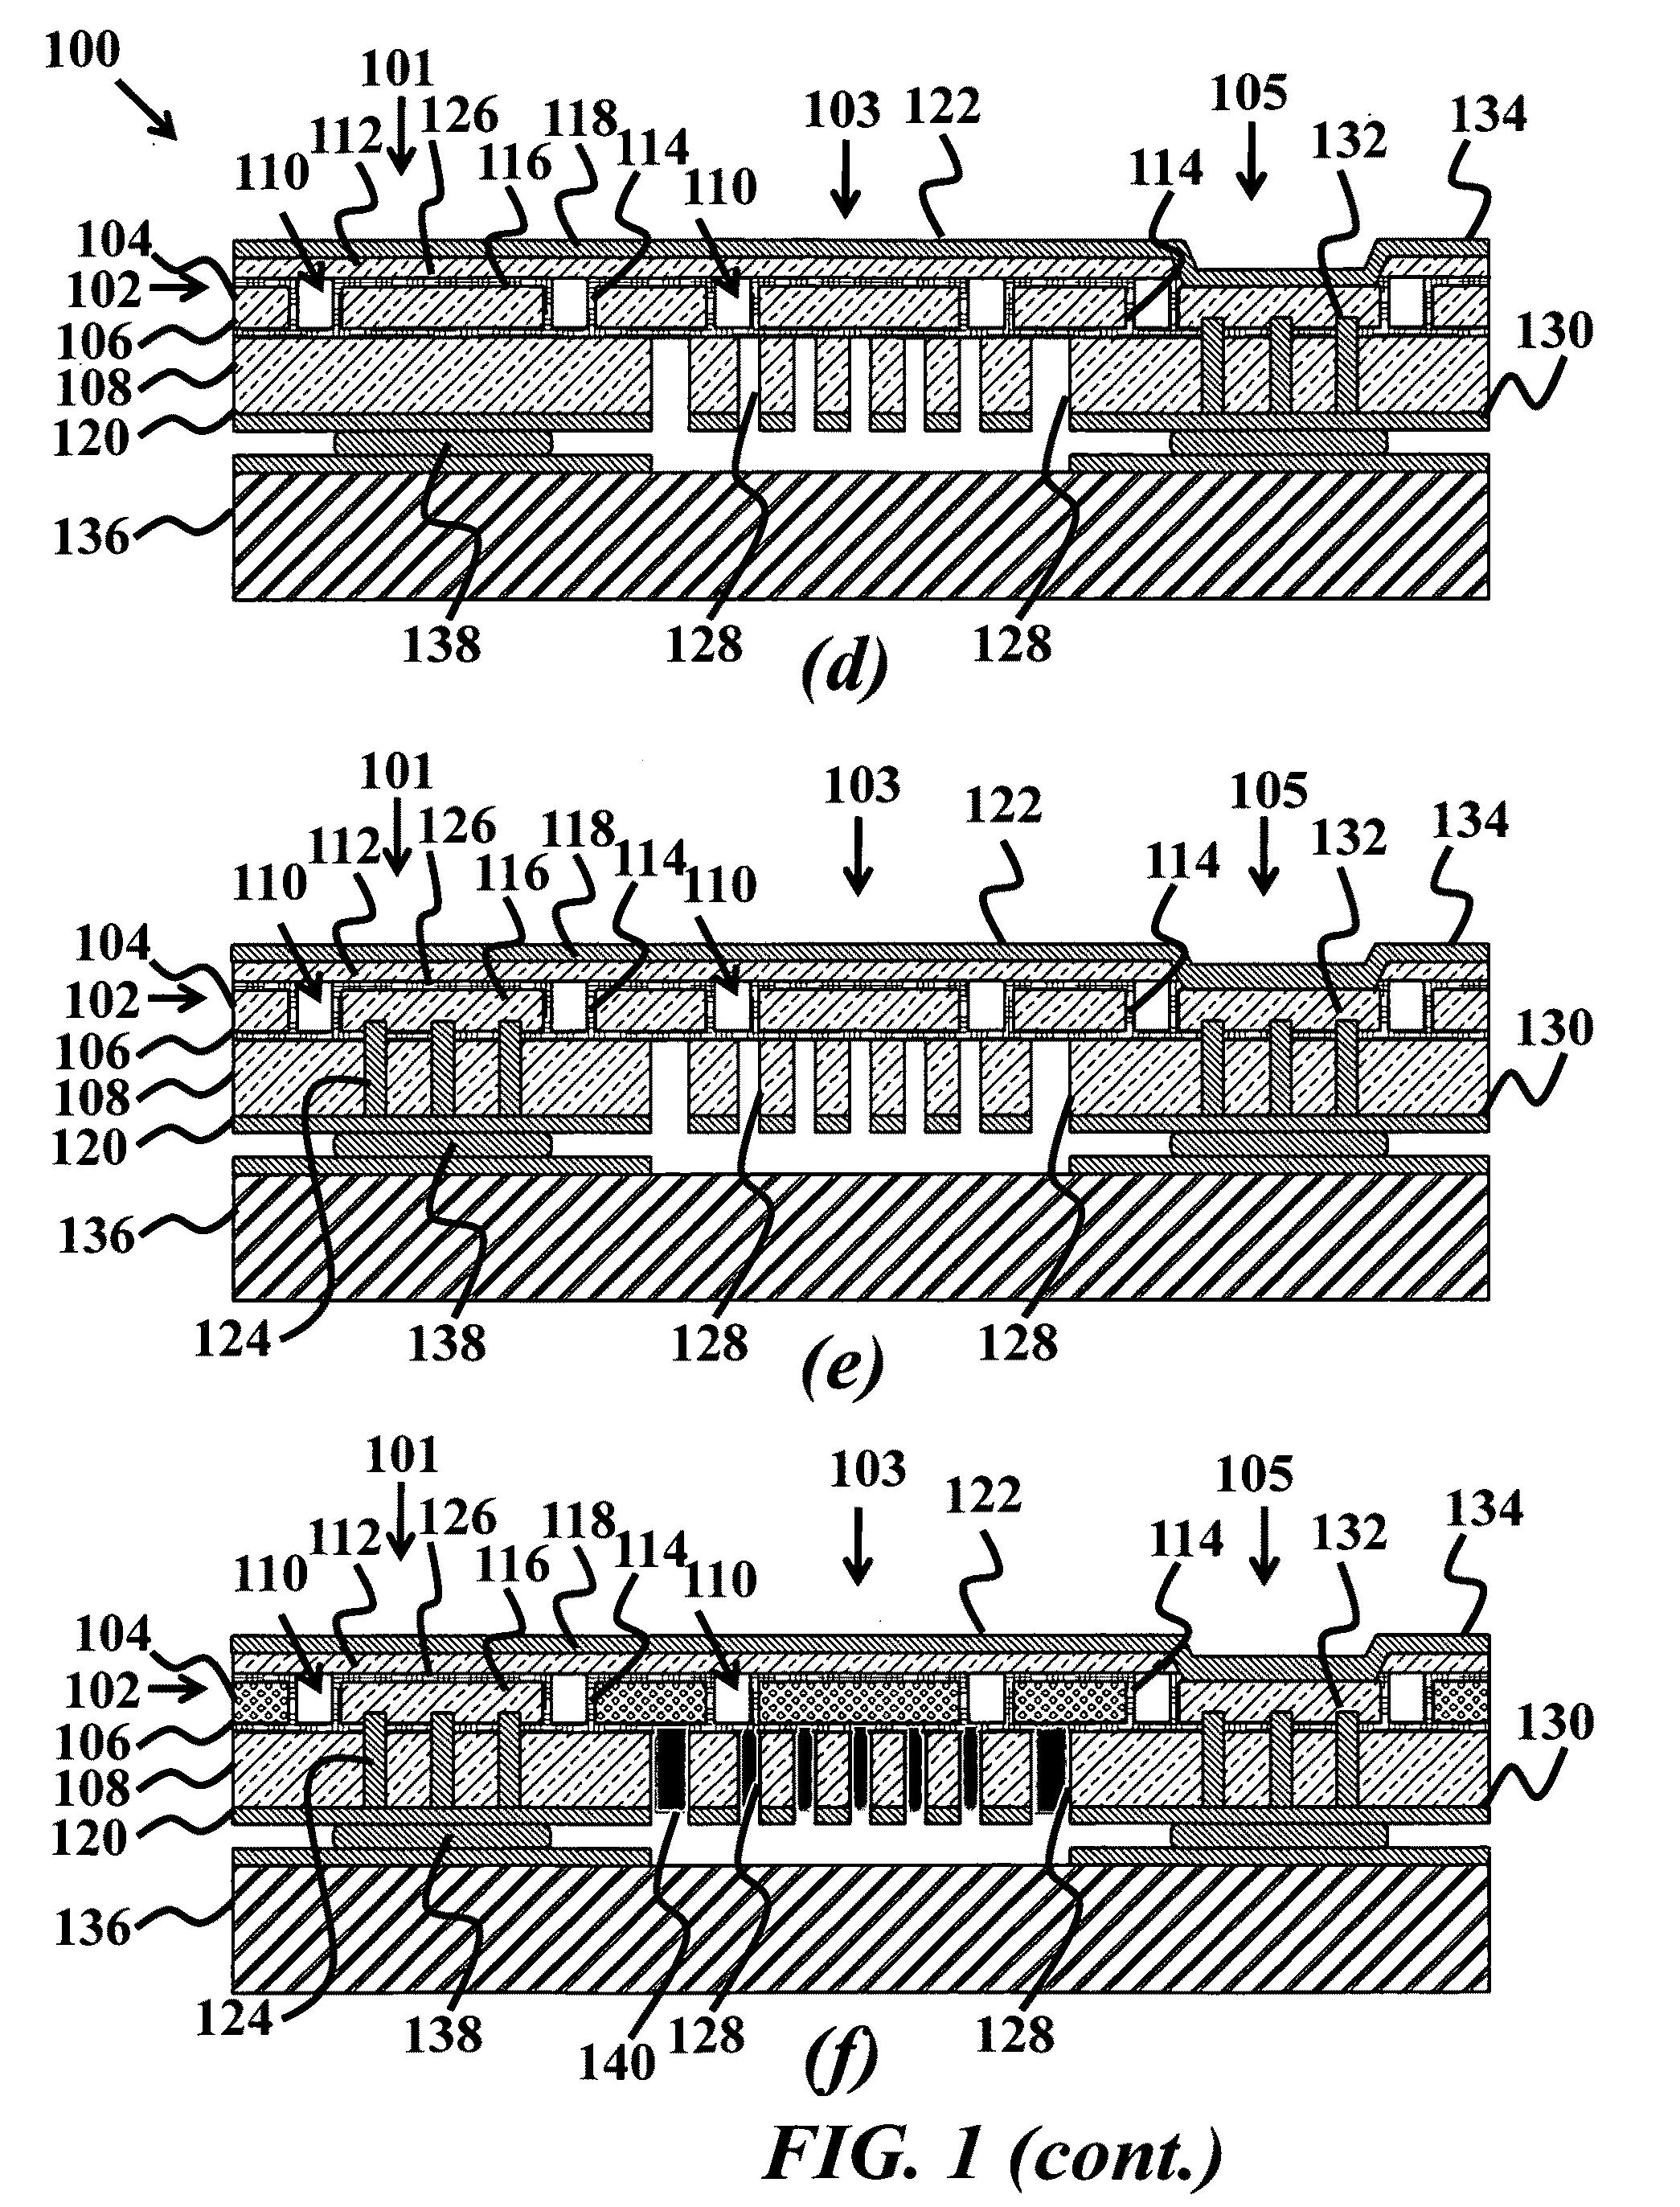 Direct wafer bonded 2-D CUMT array